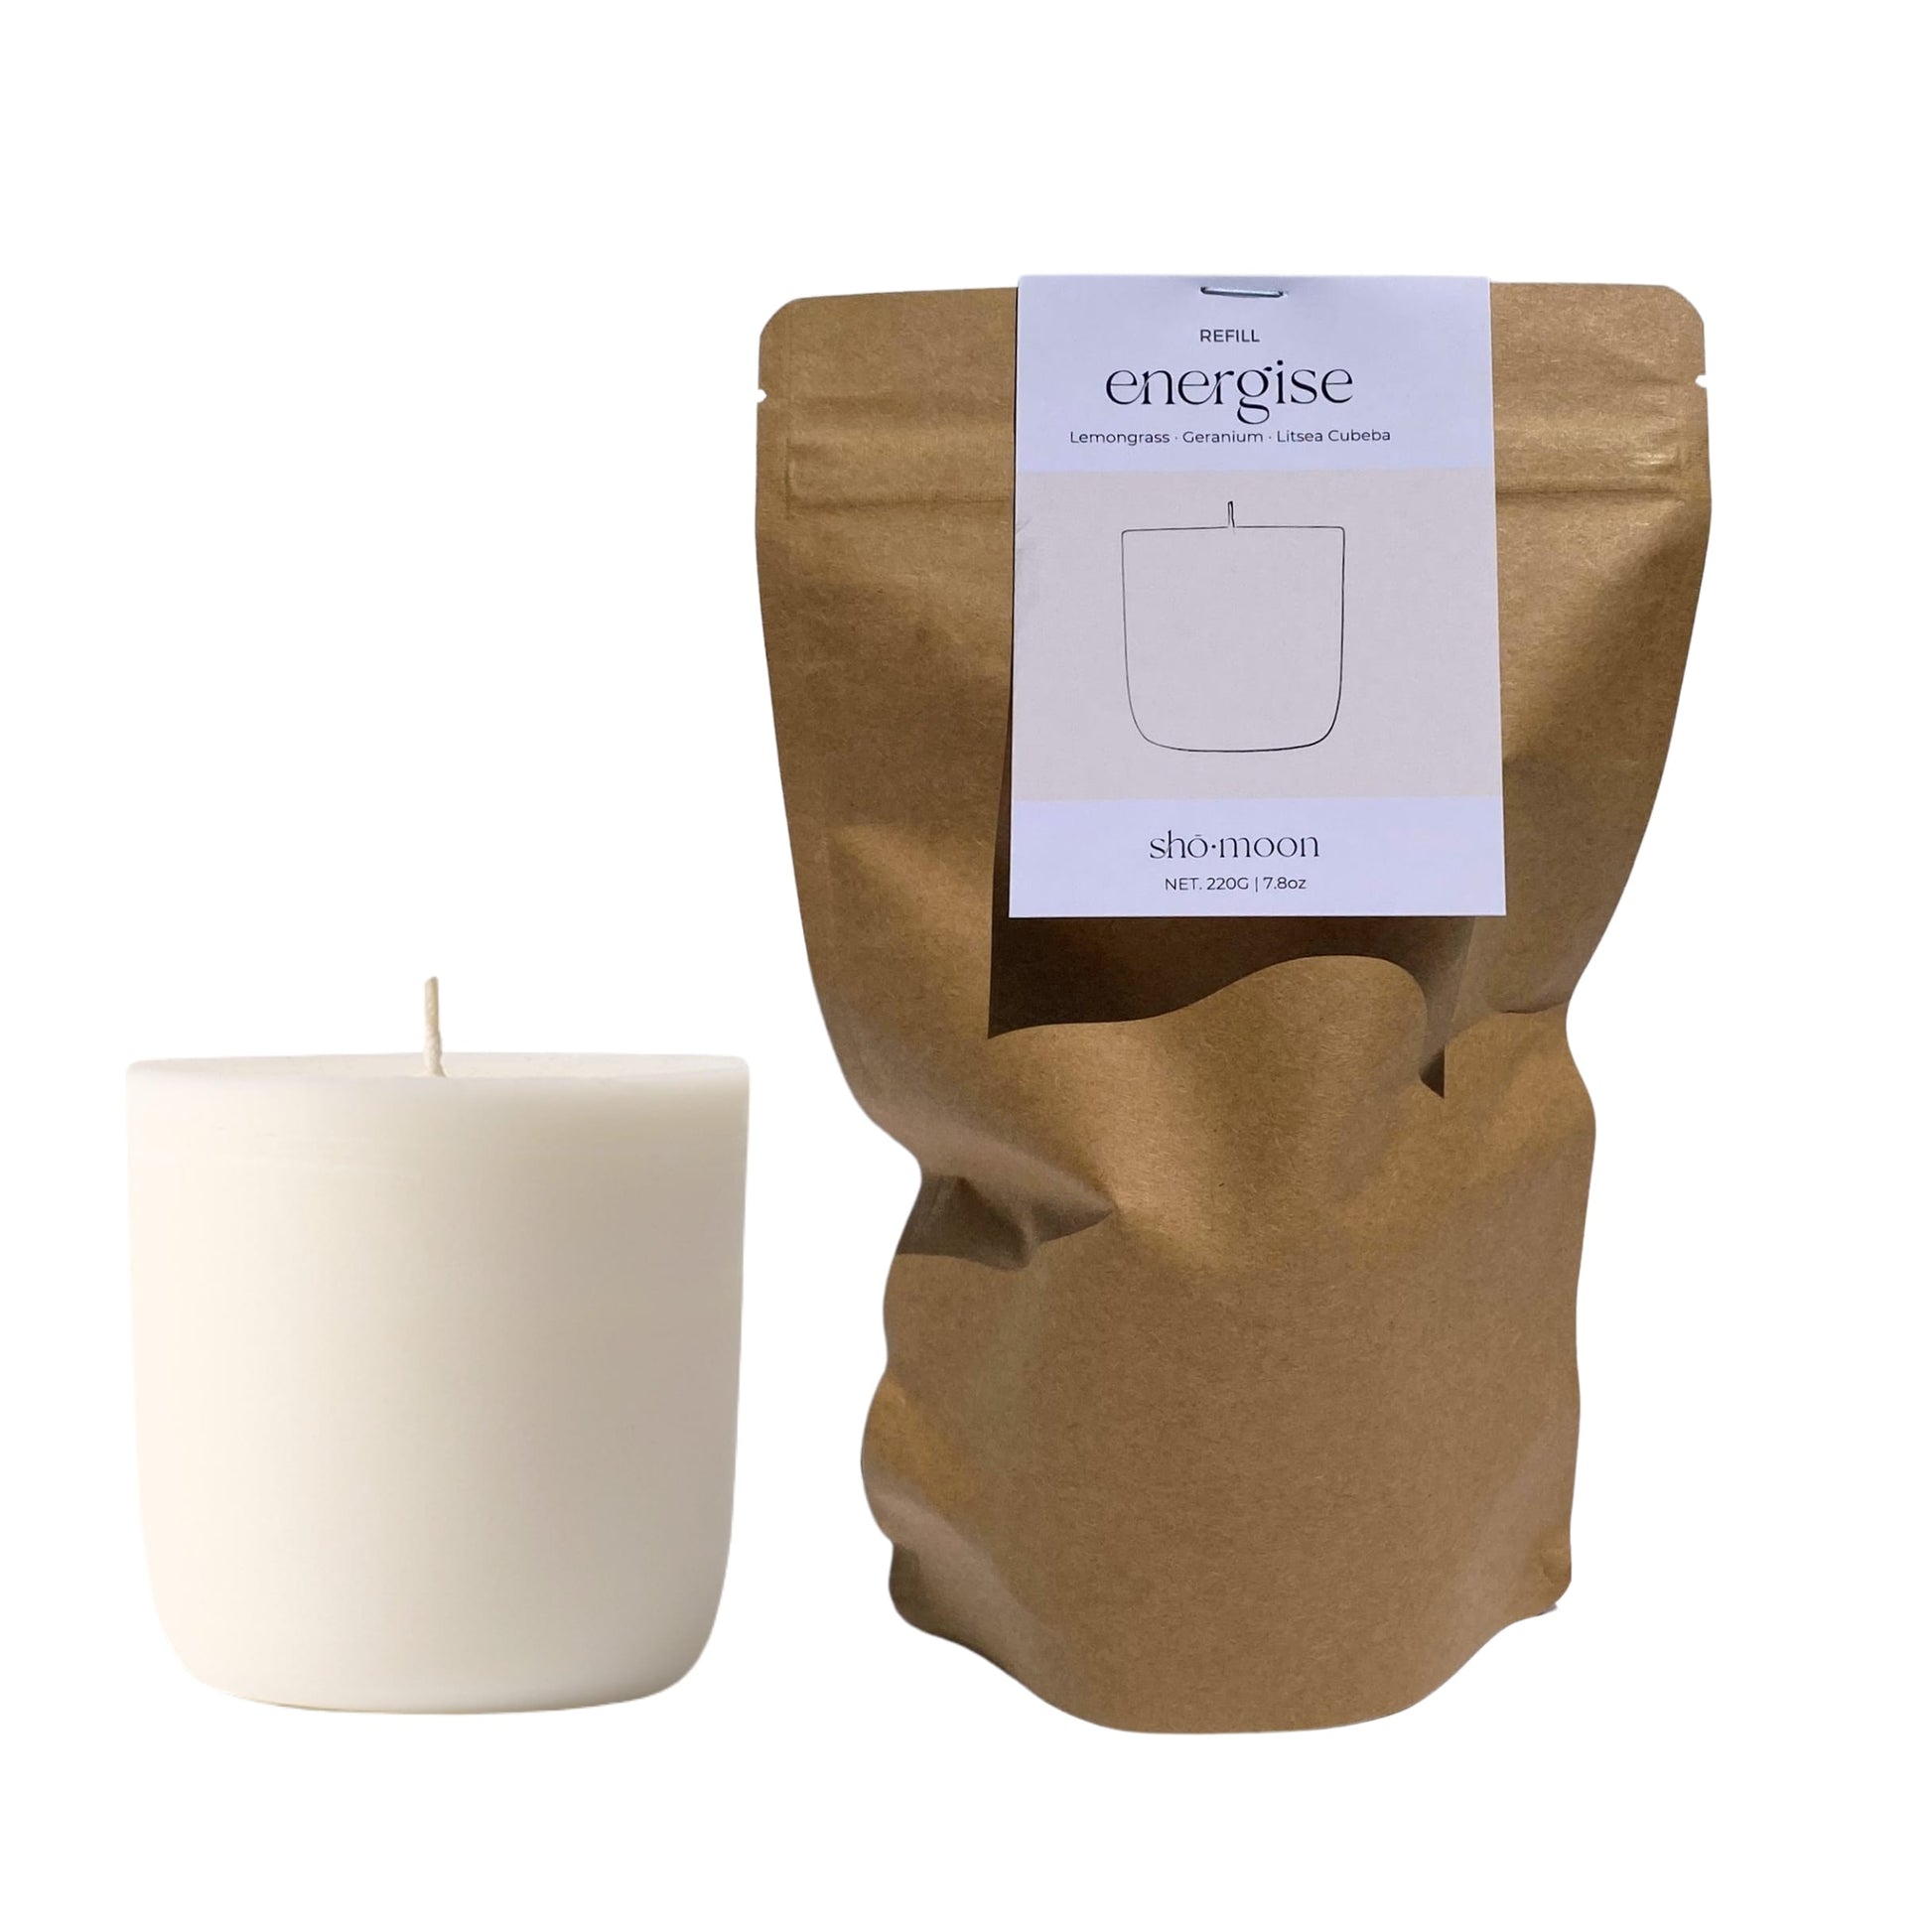 Shō-moon Energise Meditation Candle Refill with pure essentials oils and clean burning and natural wax and packaging